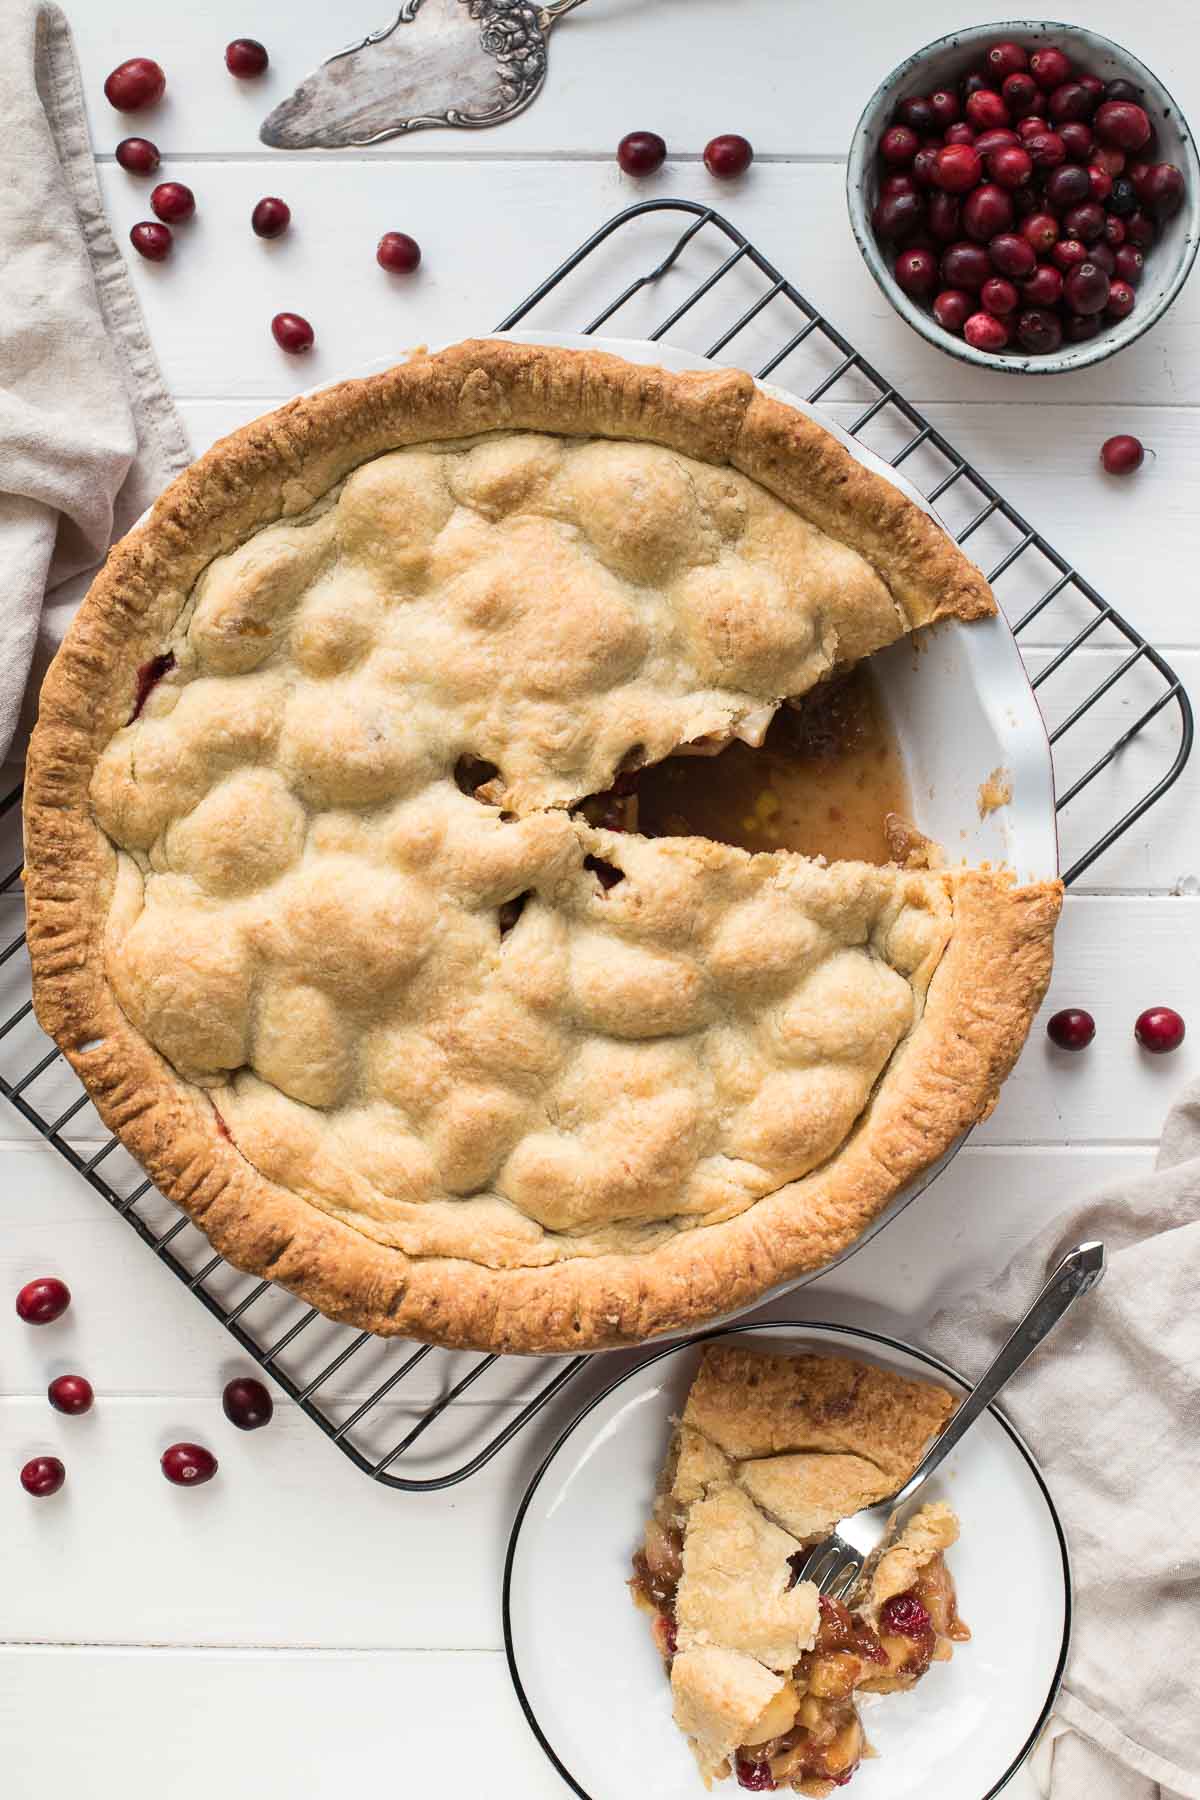 Classic Apple Pie with Cranberries